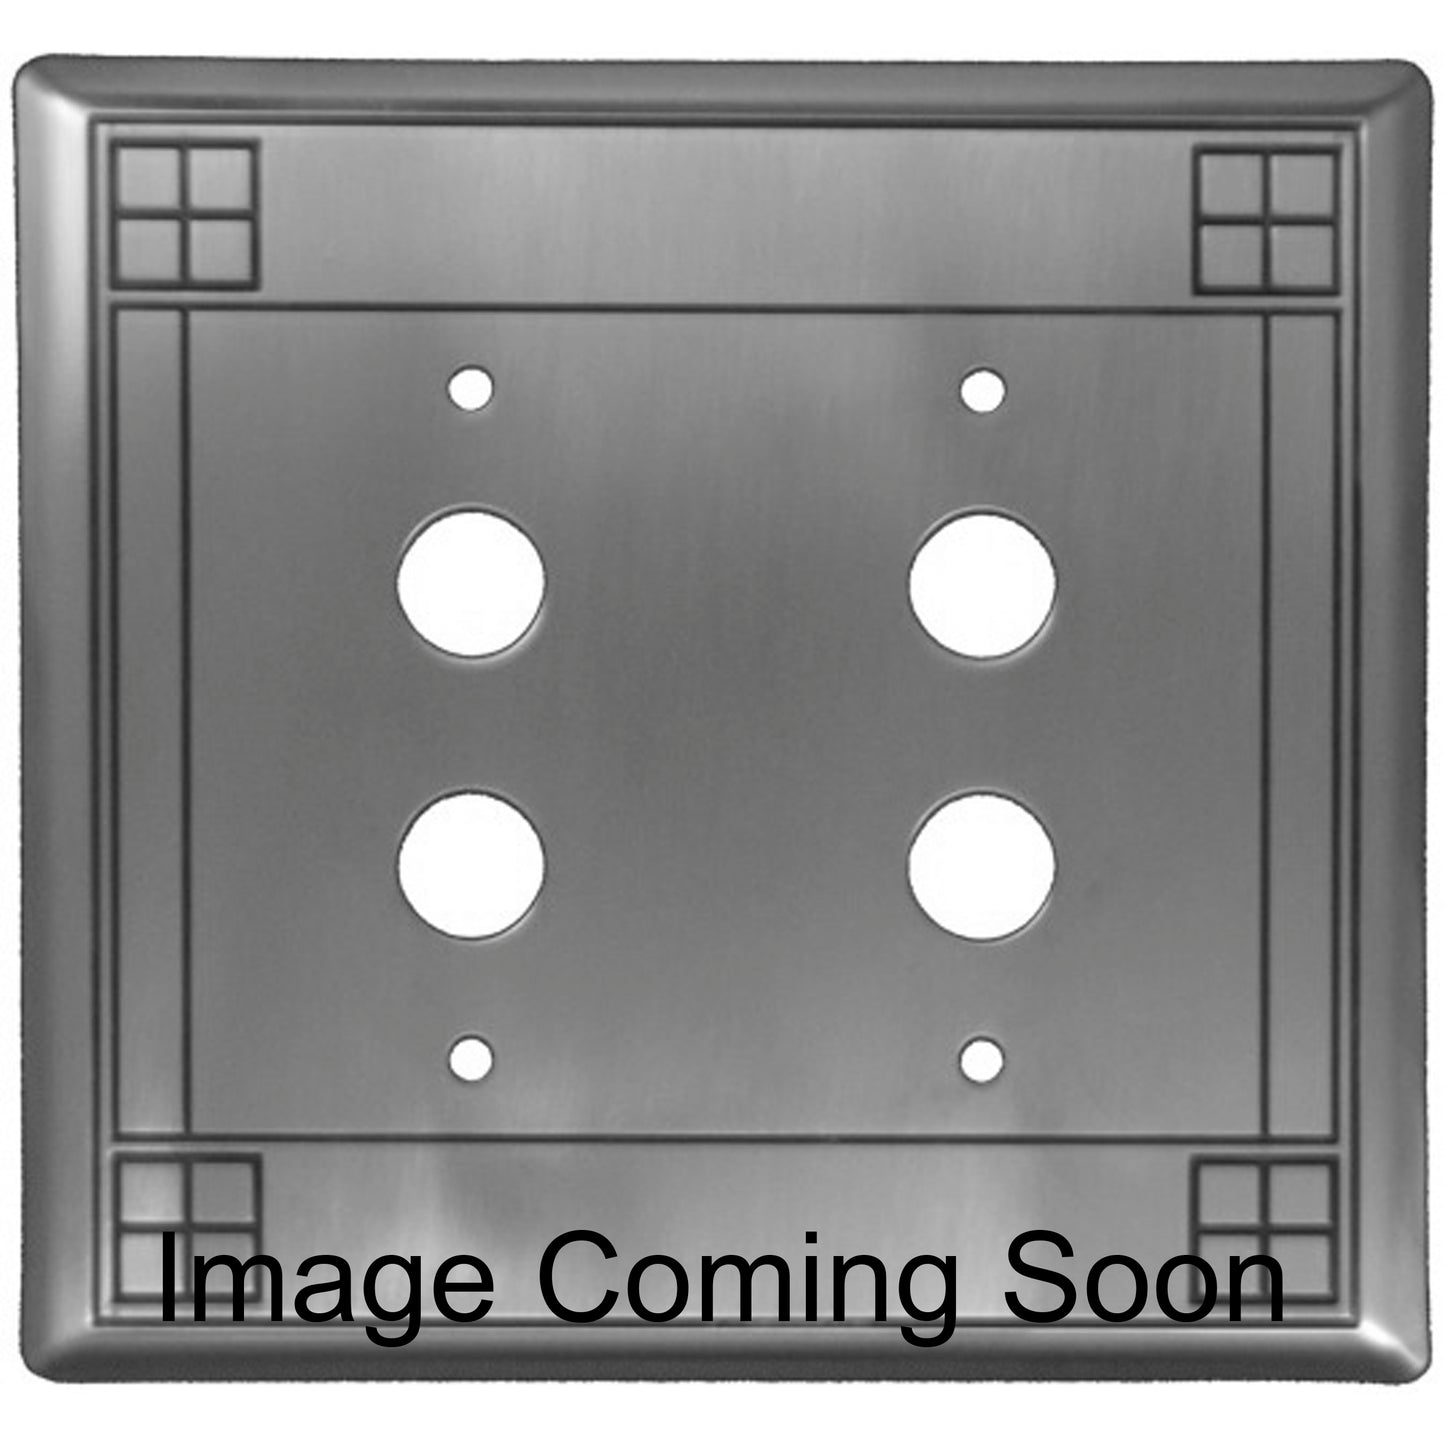 Arts and Crafts Stainless Steel 2 PushbuttonSwitchplate